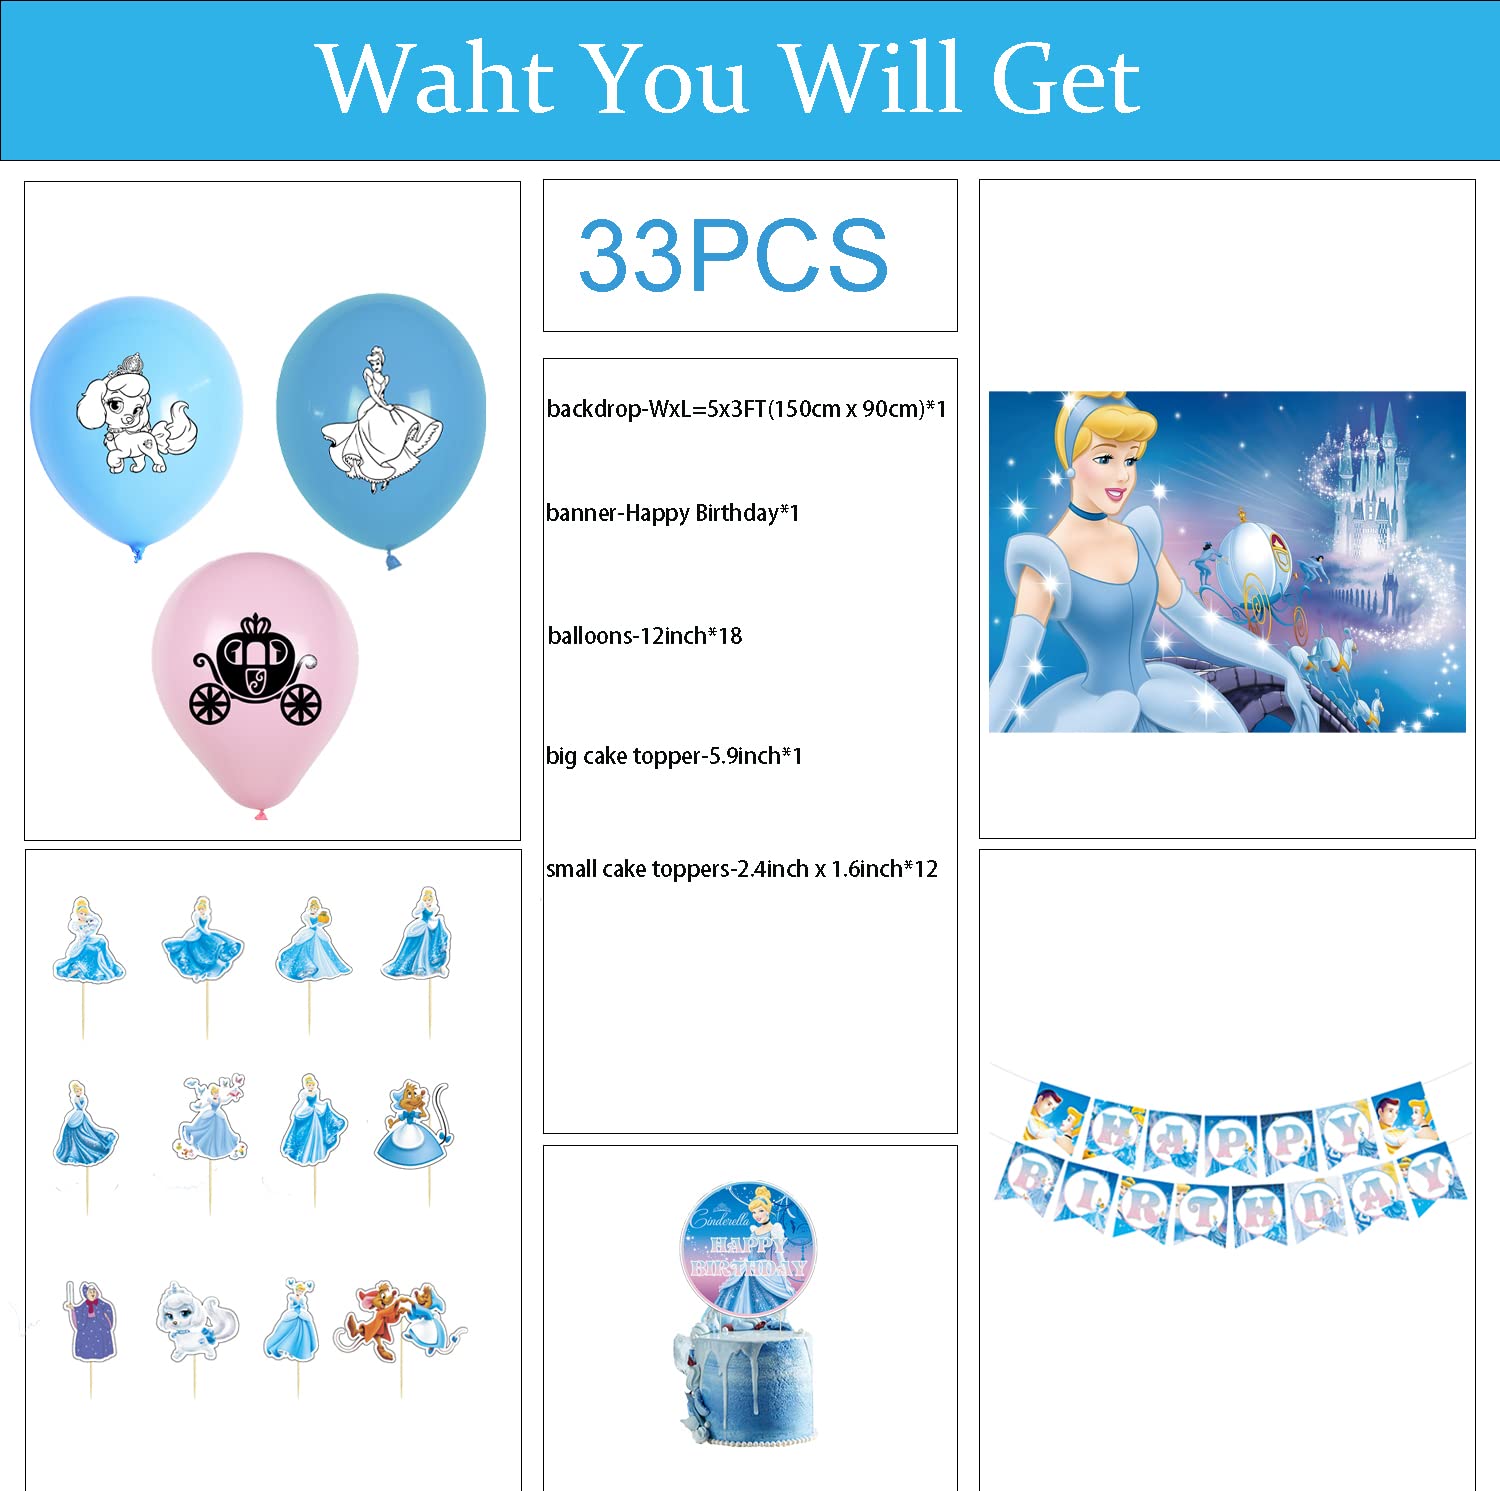 33 Pcs Cinderella Party Supplies,1 Cinderella Backdrop,1 Cake Topper, 12 Cupcake Toppers, 1 Happy Birthday Banner, 18 Balloons for Girls & Boys (5x3FT)